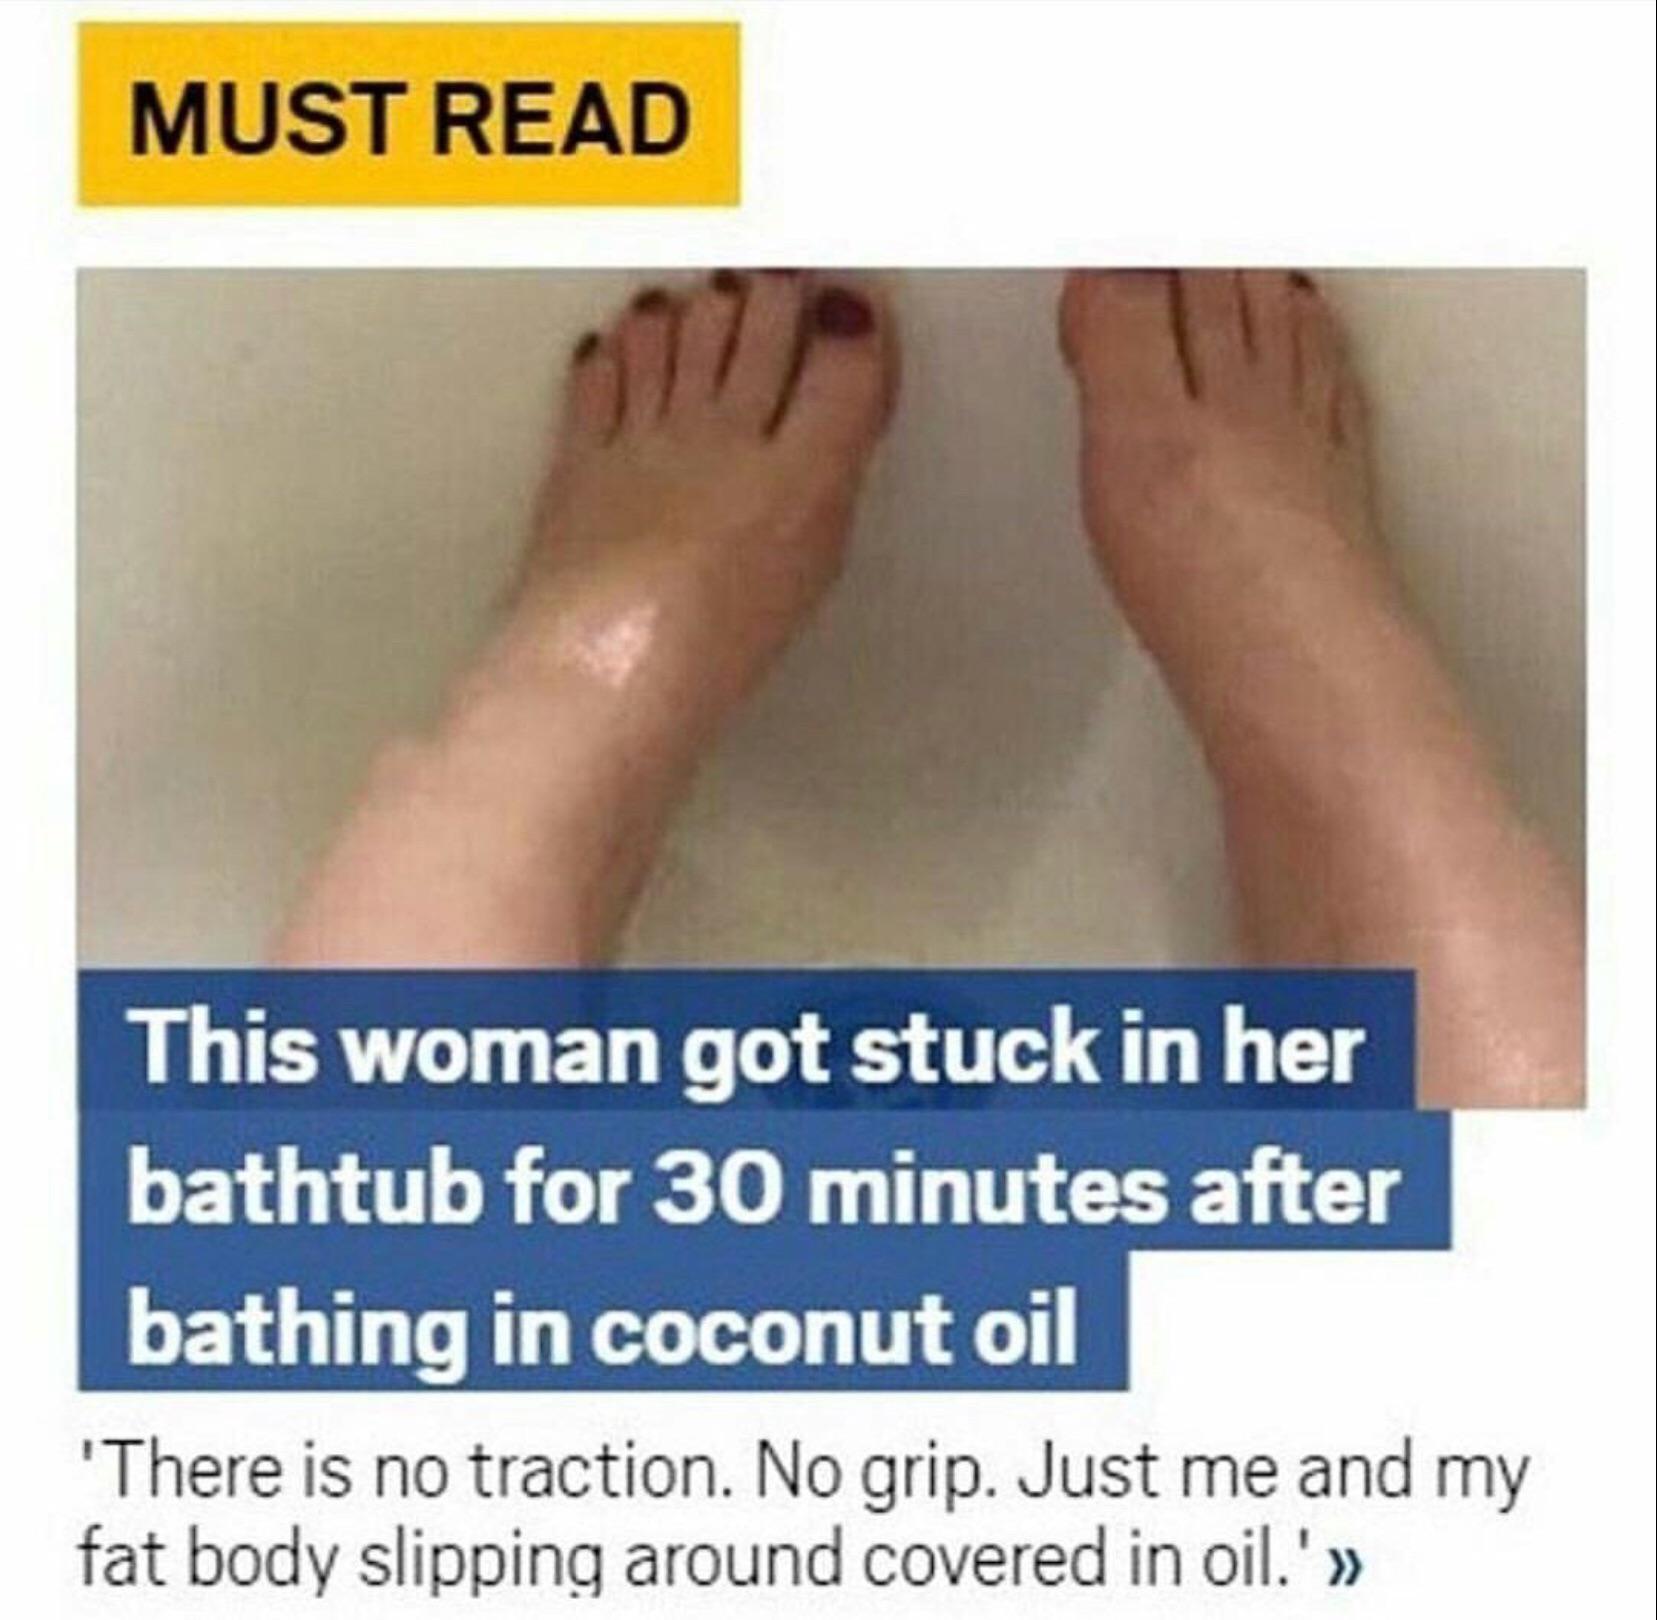 foot - Must Read This woman got stuck in her bathtub for 30 minutes after bathing in coconut oil 'There is no traction. No grip. Just me and my fat body slipping around covered in oil.' >>